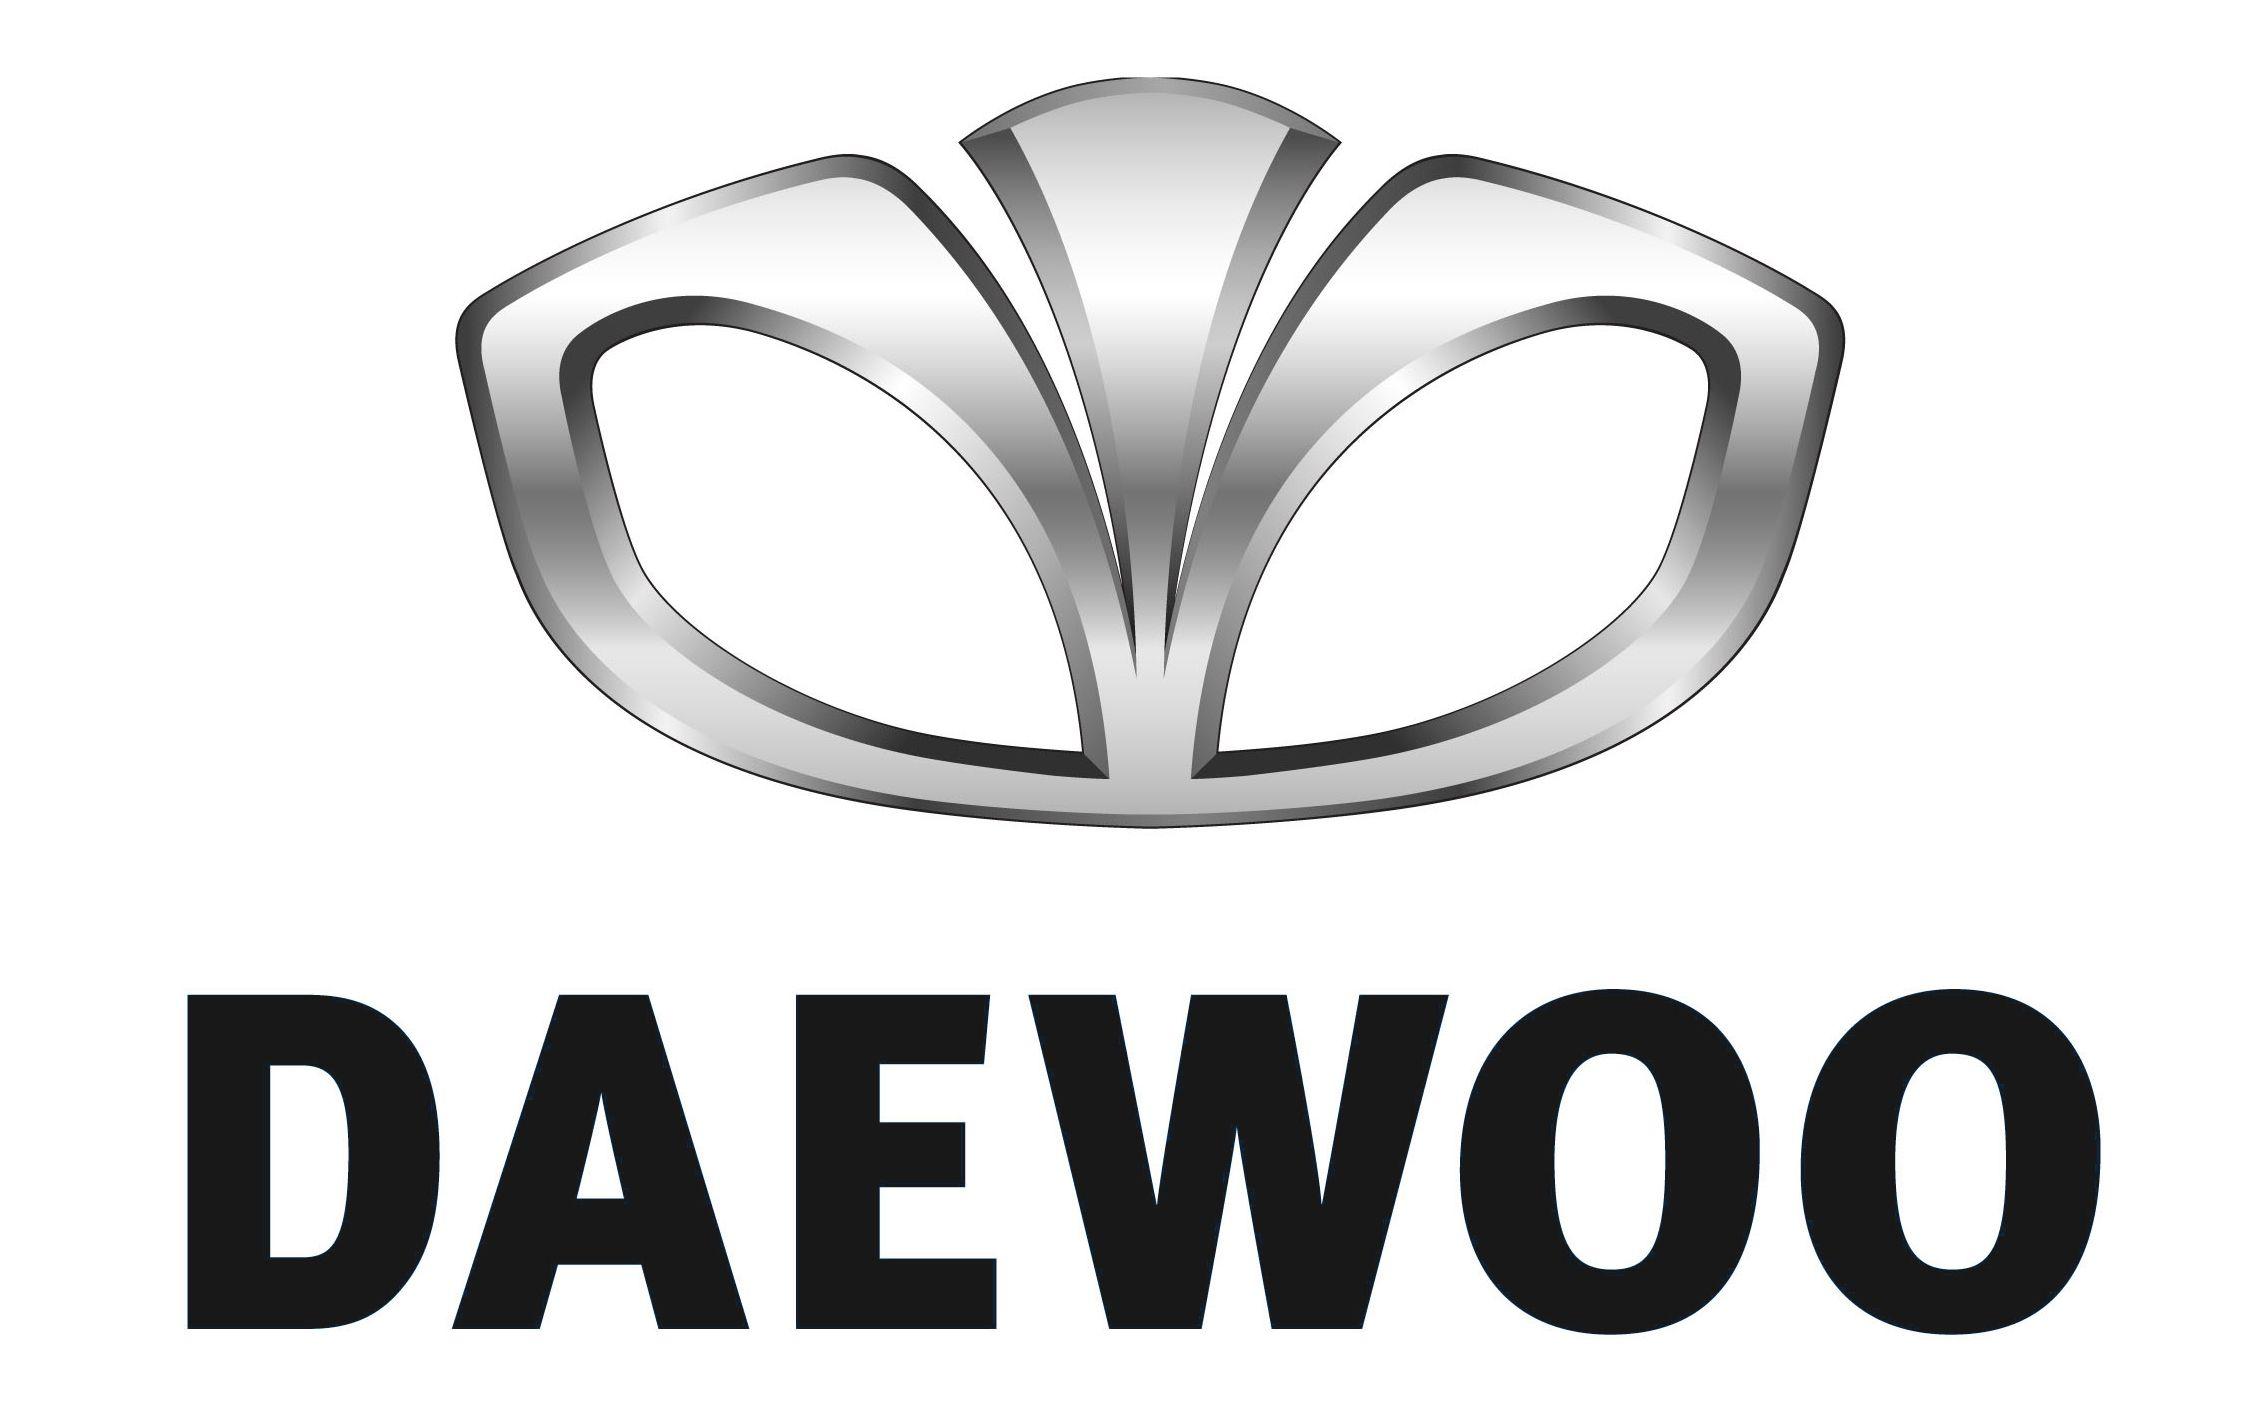 Old Daewoo Logo - Daewoo Logo Meaning and History, latest models. World Cars Brands